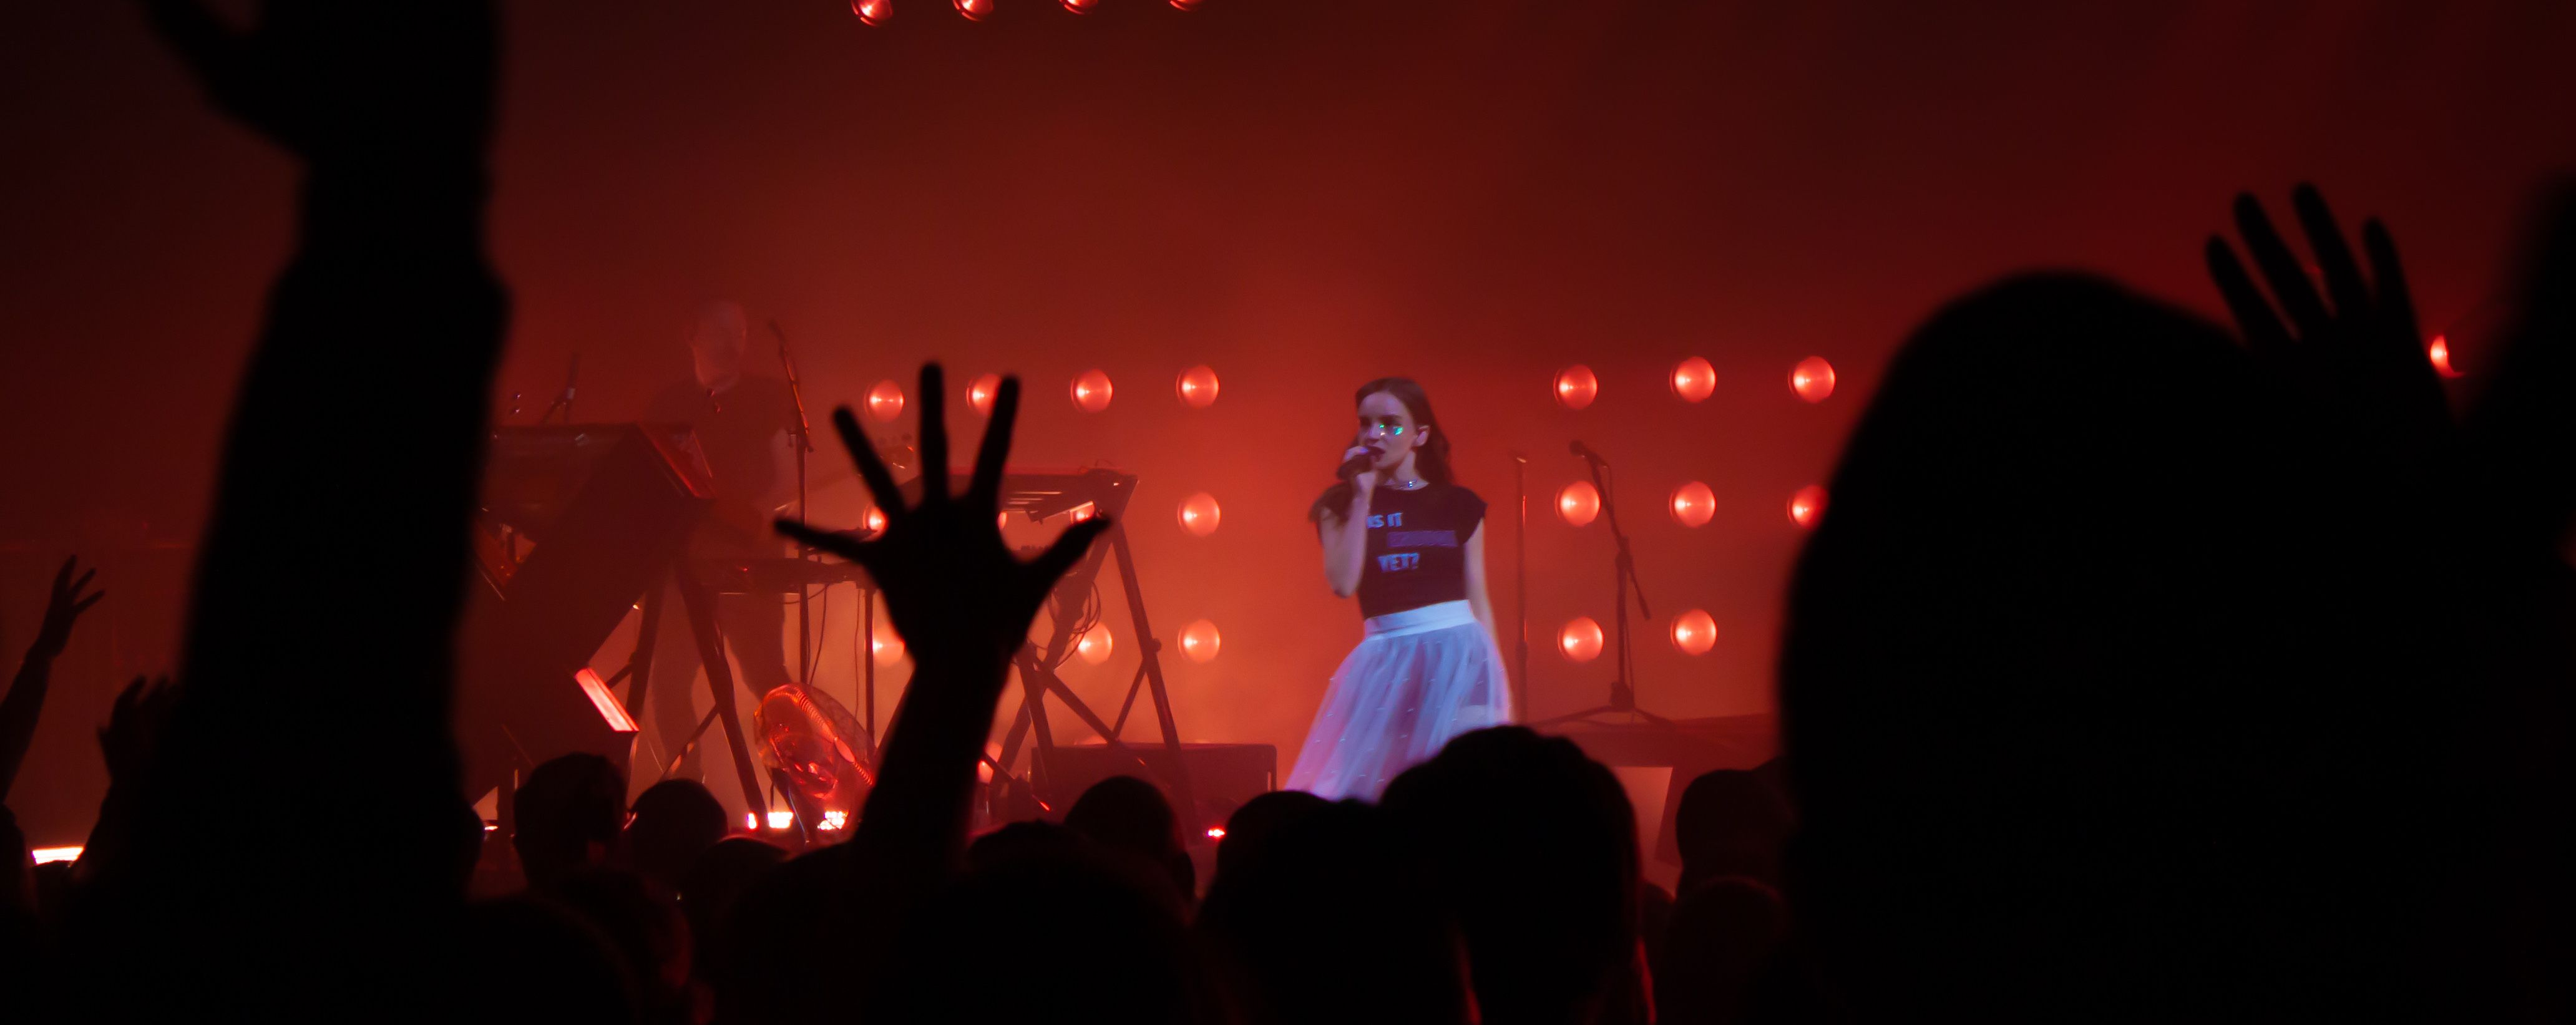 CHVRCHES brings life to the decaying Orpheum Theatre